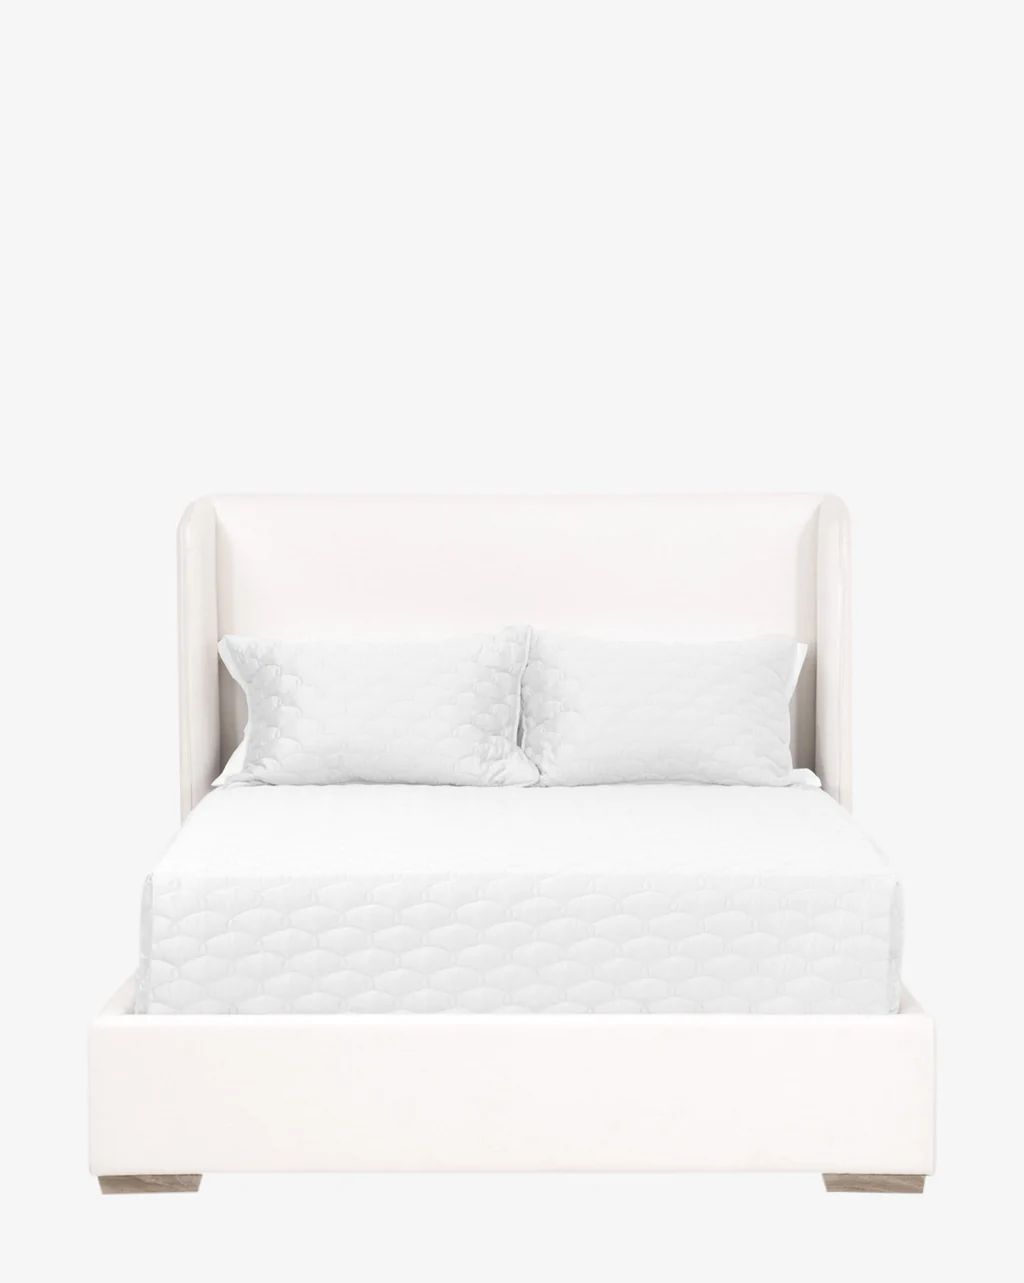 Phillip Bed | McGee & Co.